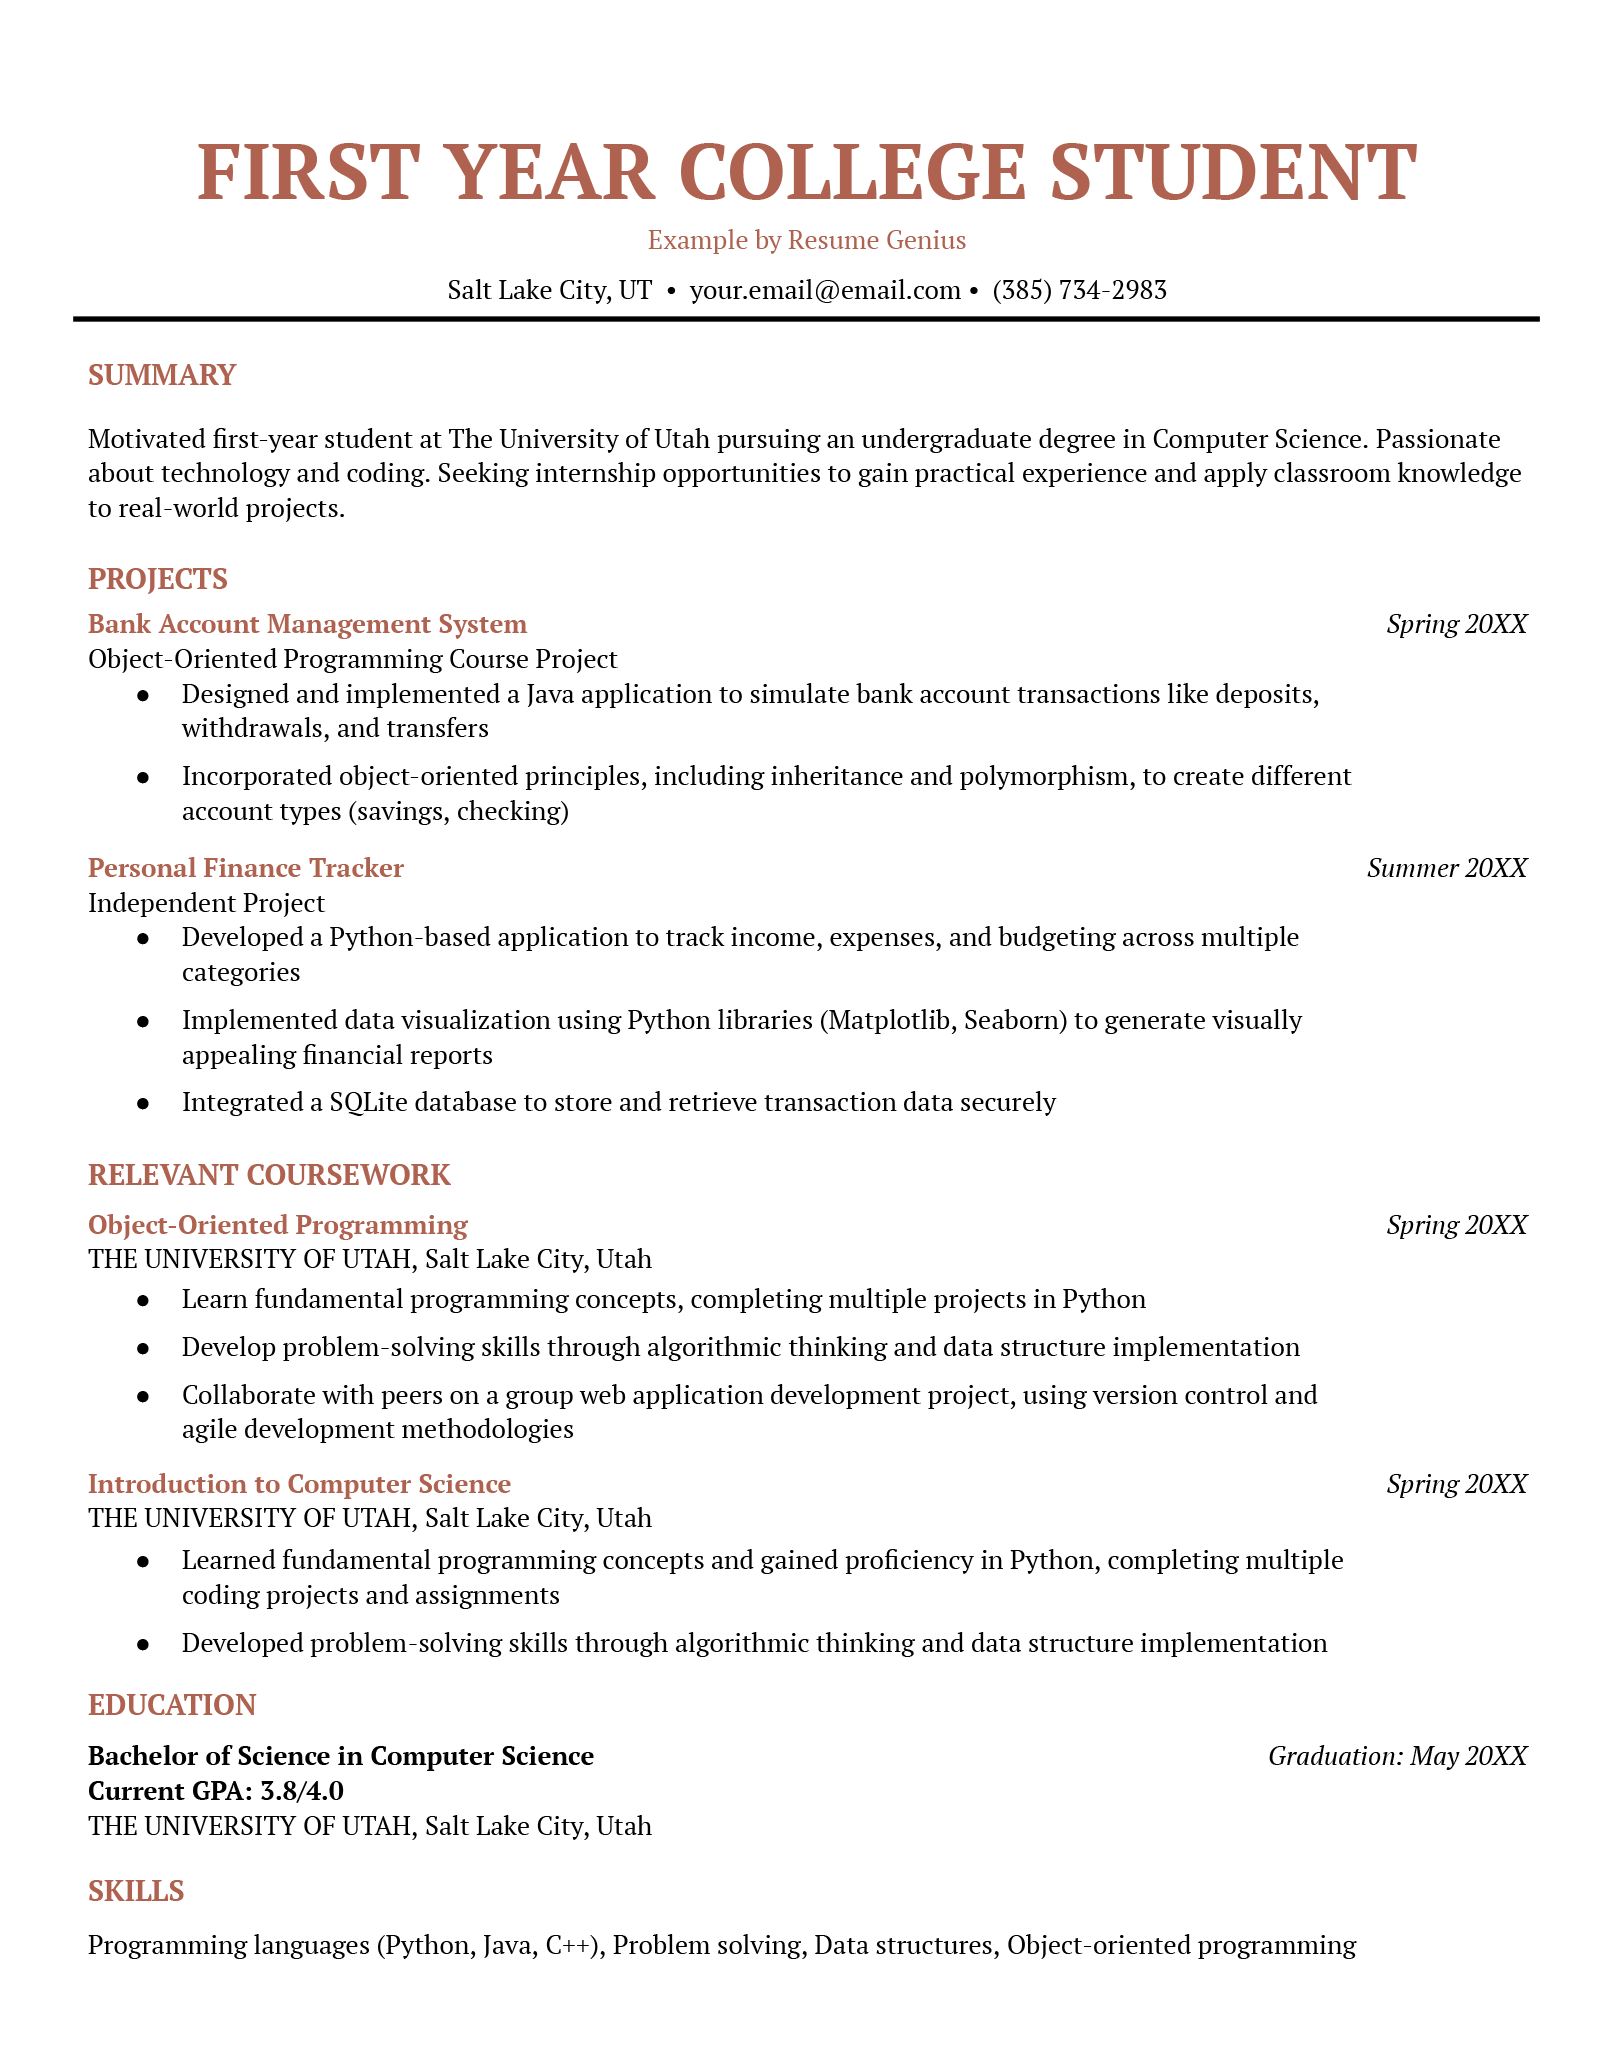 An example resume for a first-year college student. 